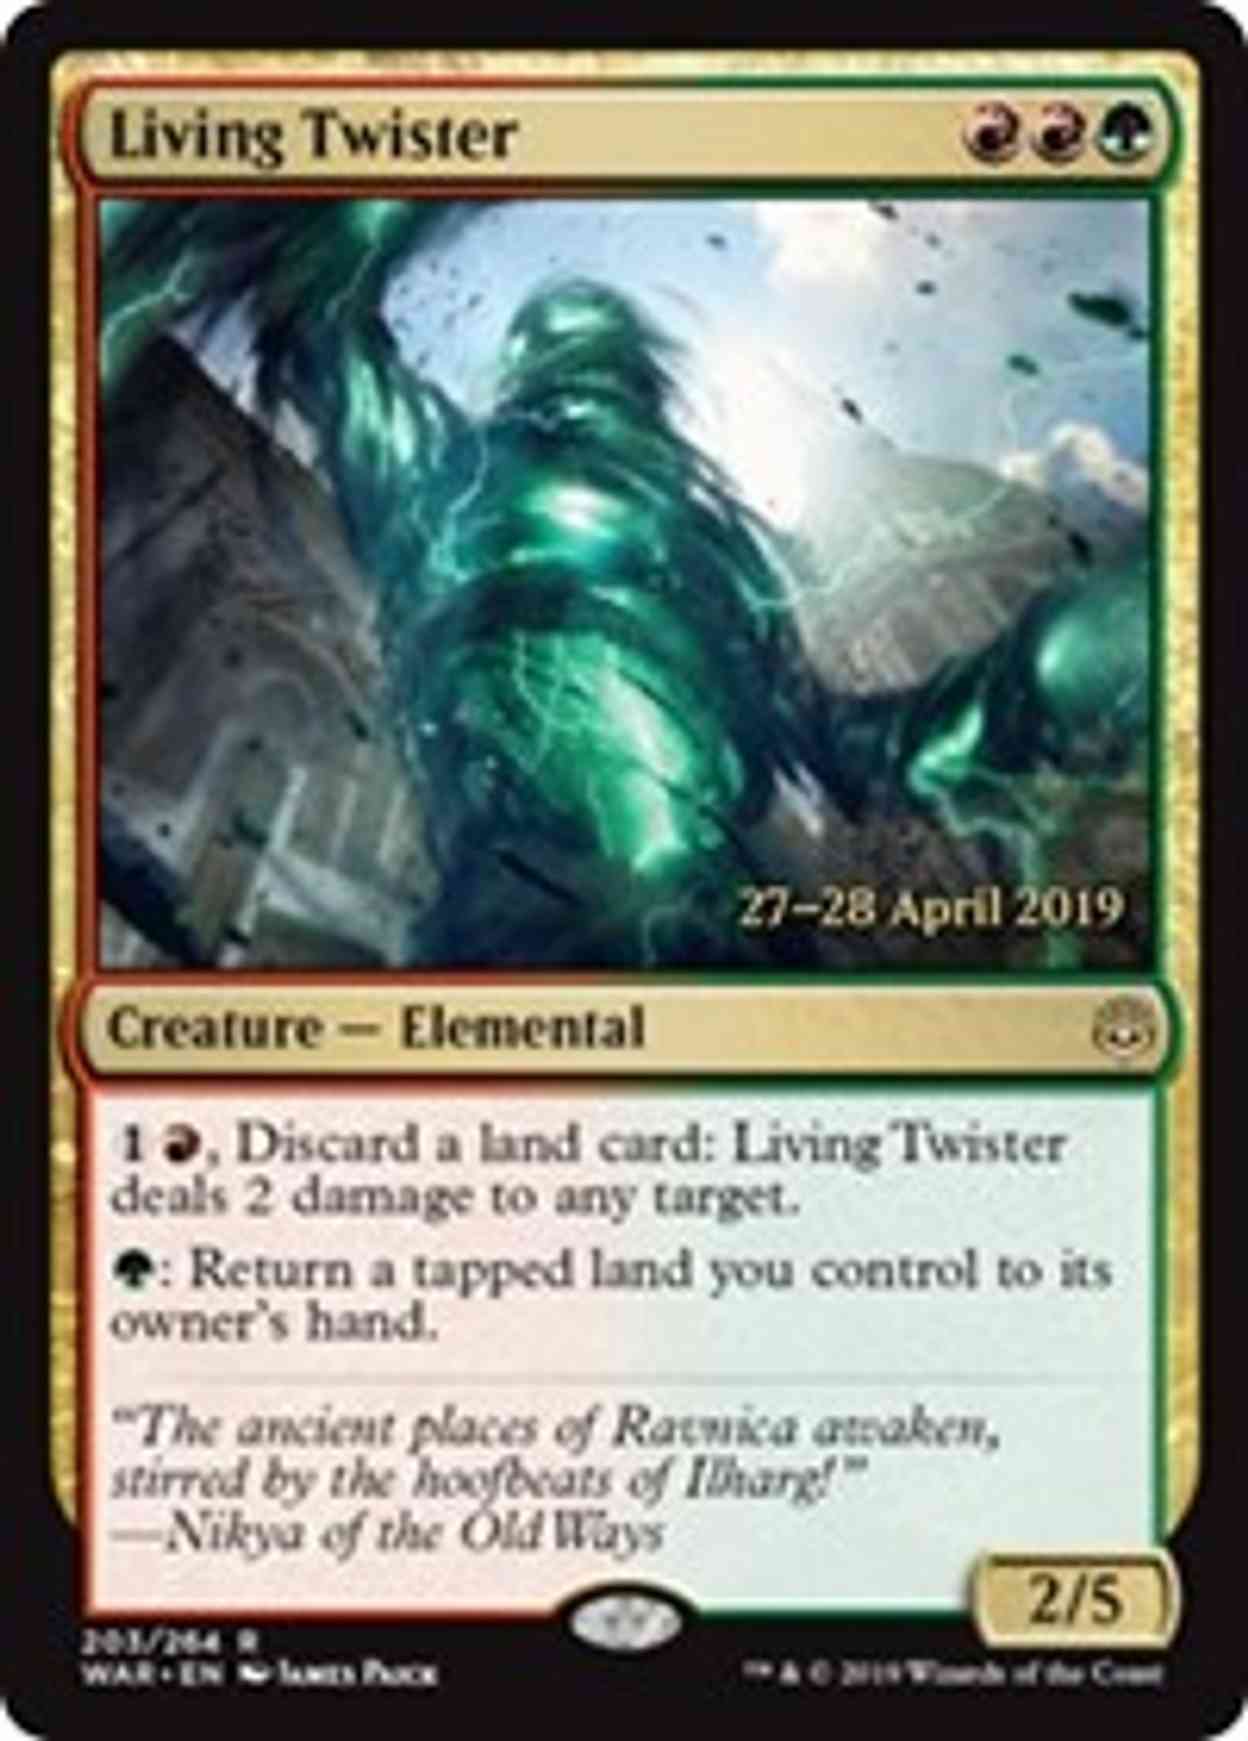 Living Twister magic card front